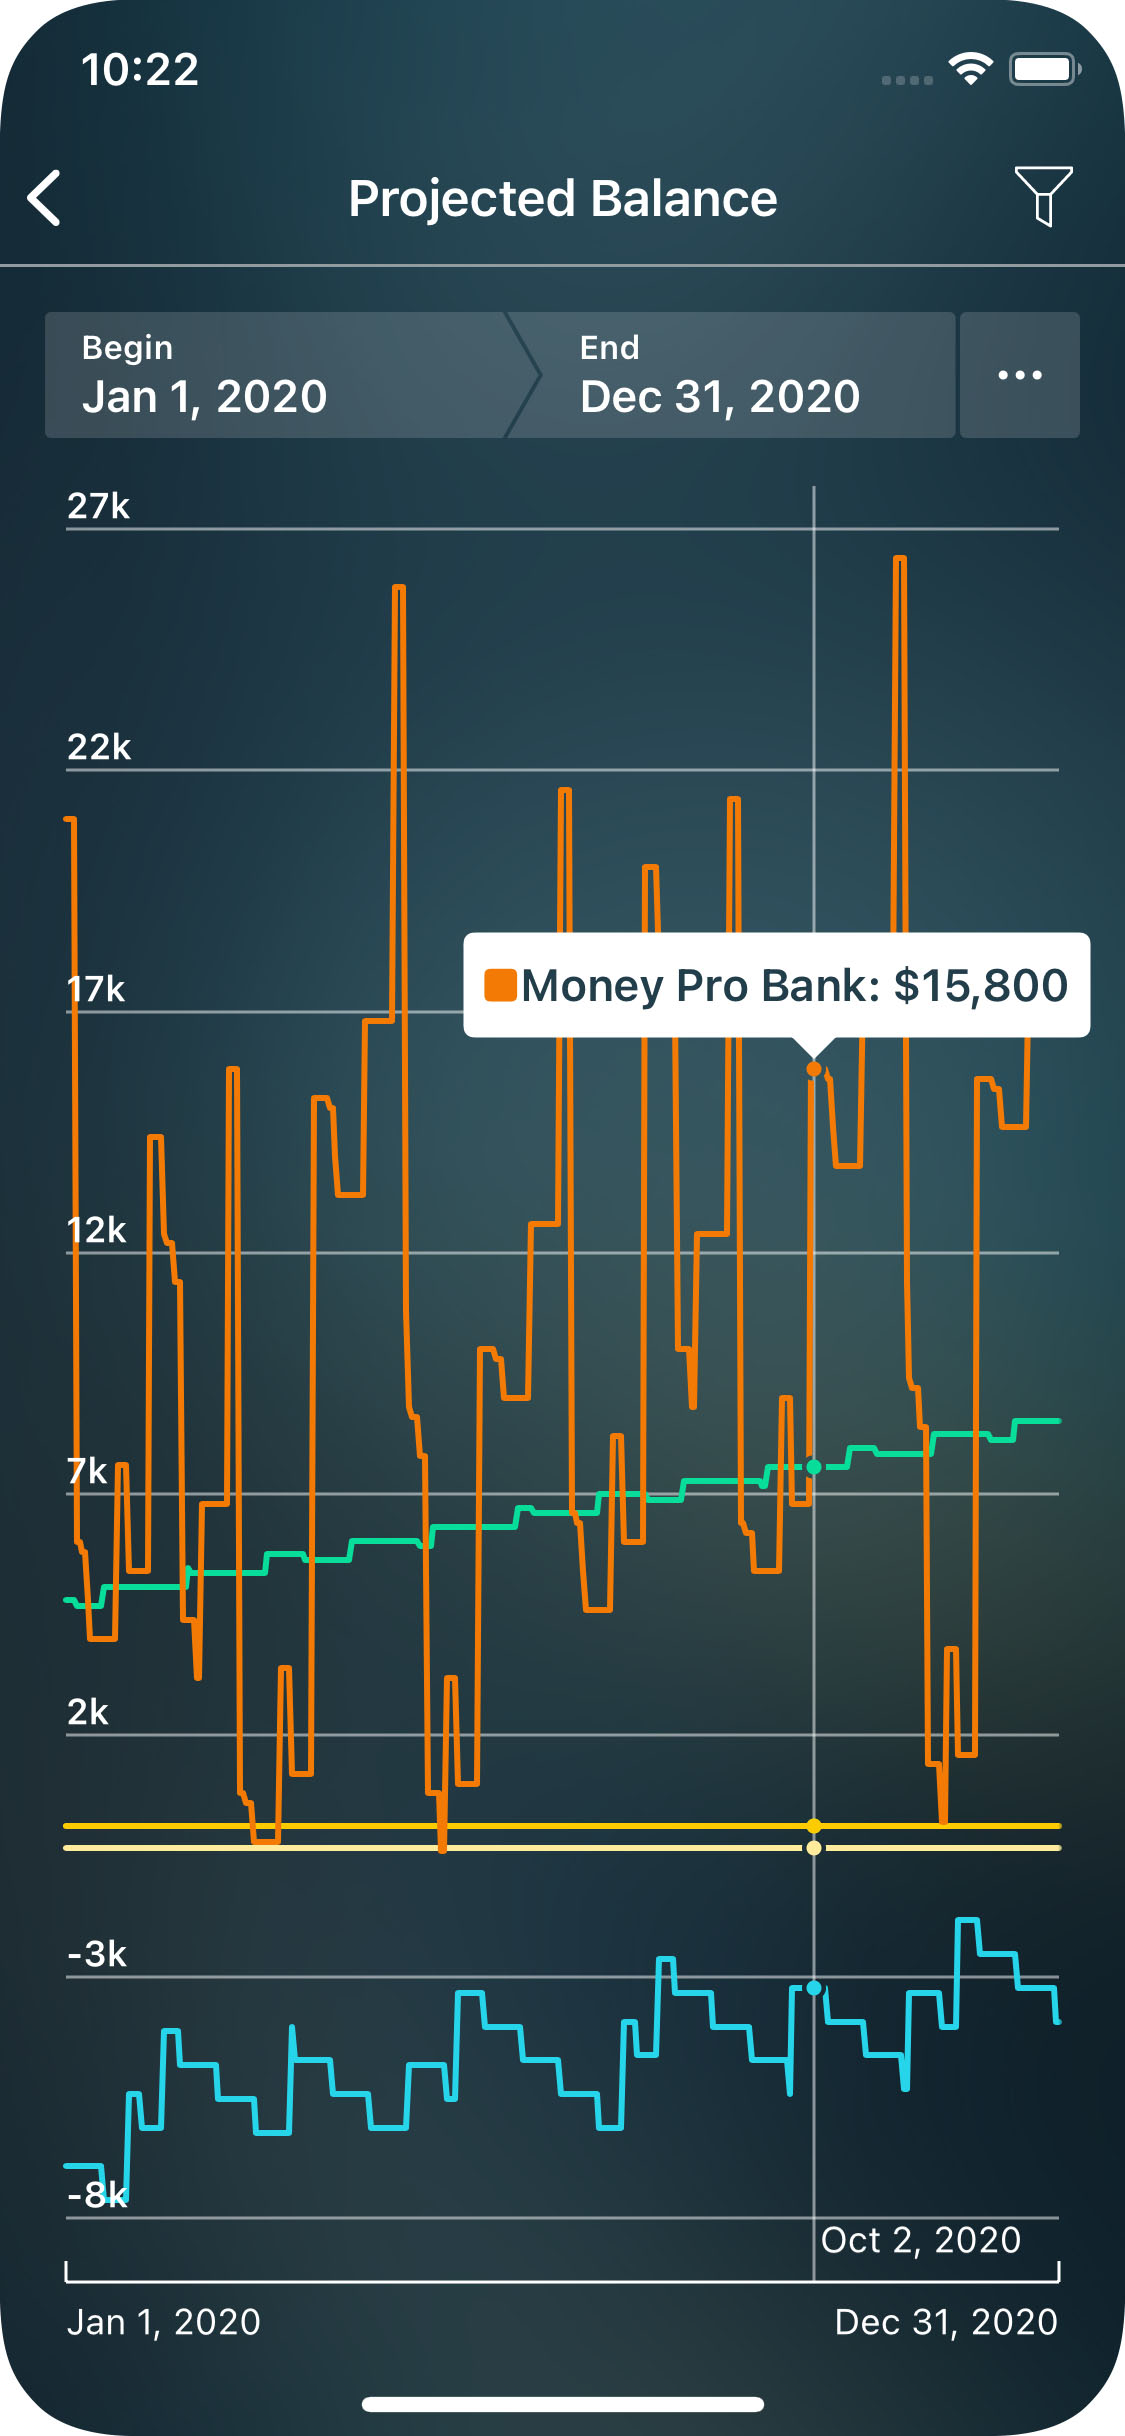 Money Pro - Projected balance report - iPhone